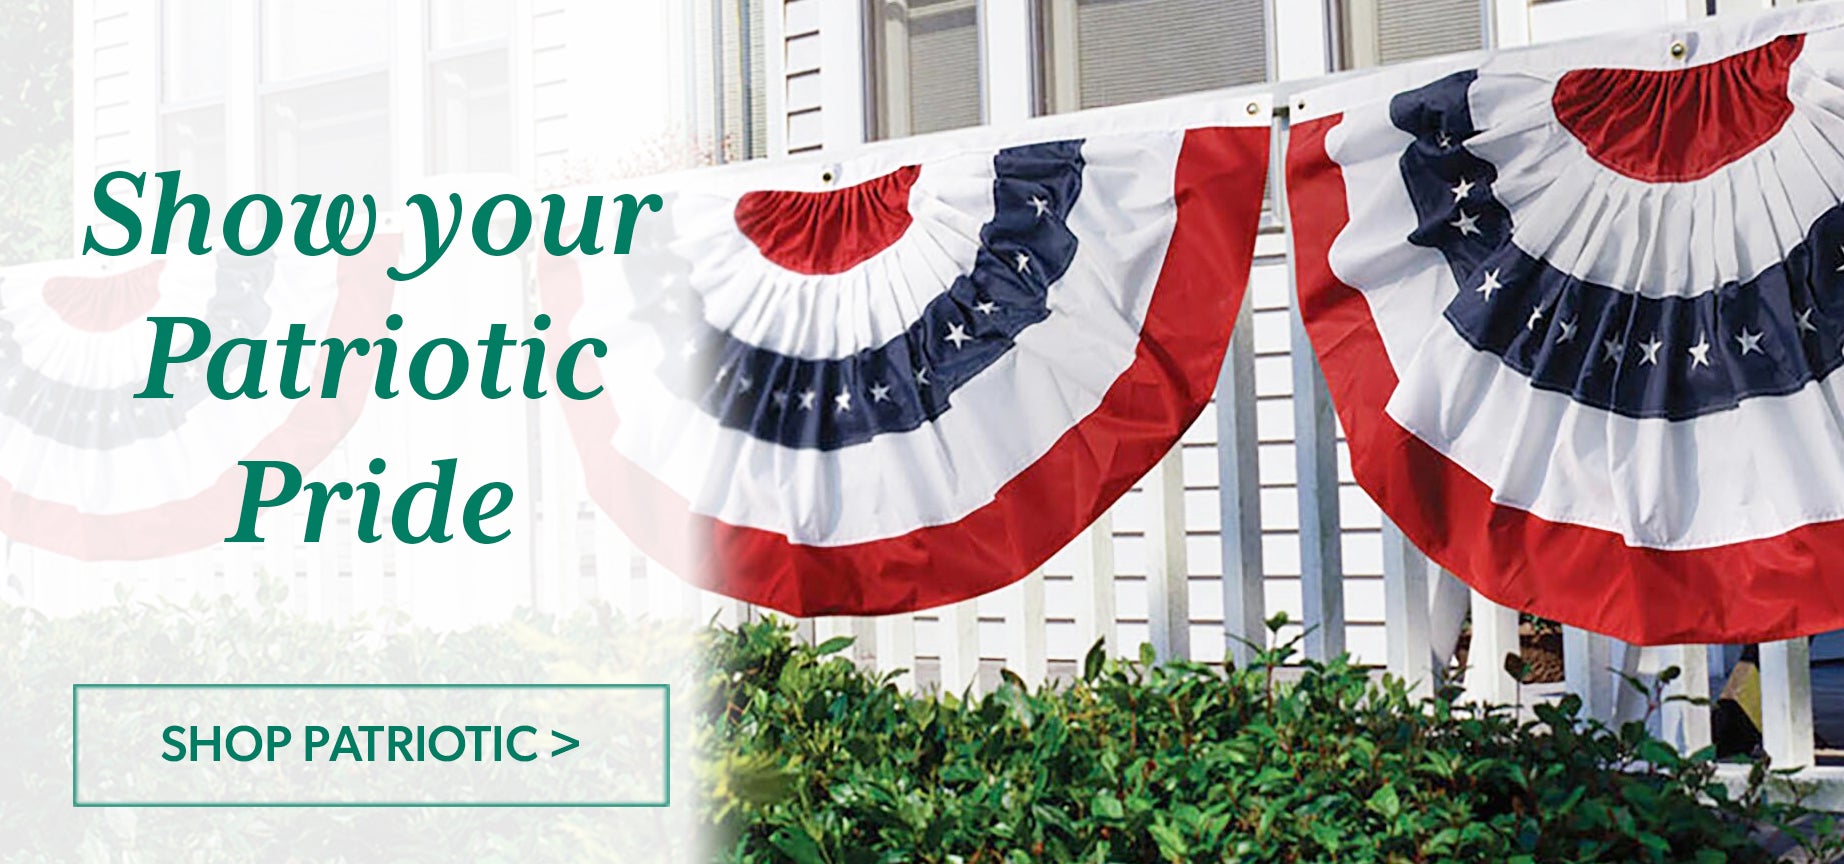 Image of front porch with red white and blue banner. Show your patriotic price. Shop Patriotic